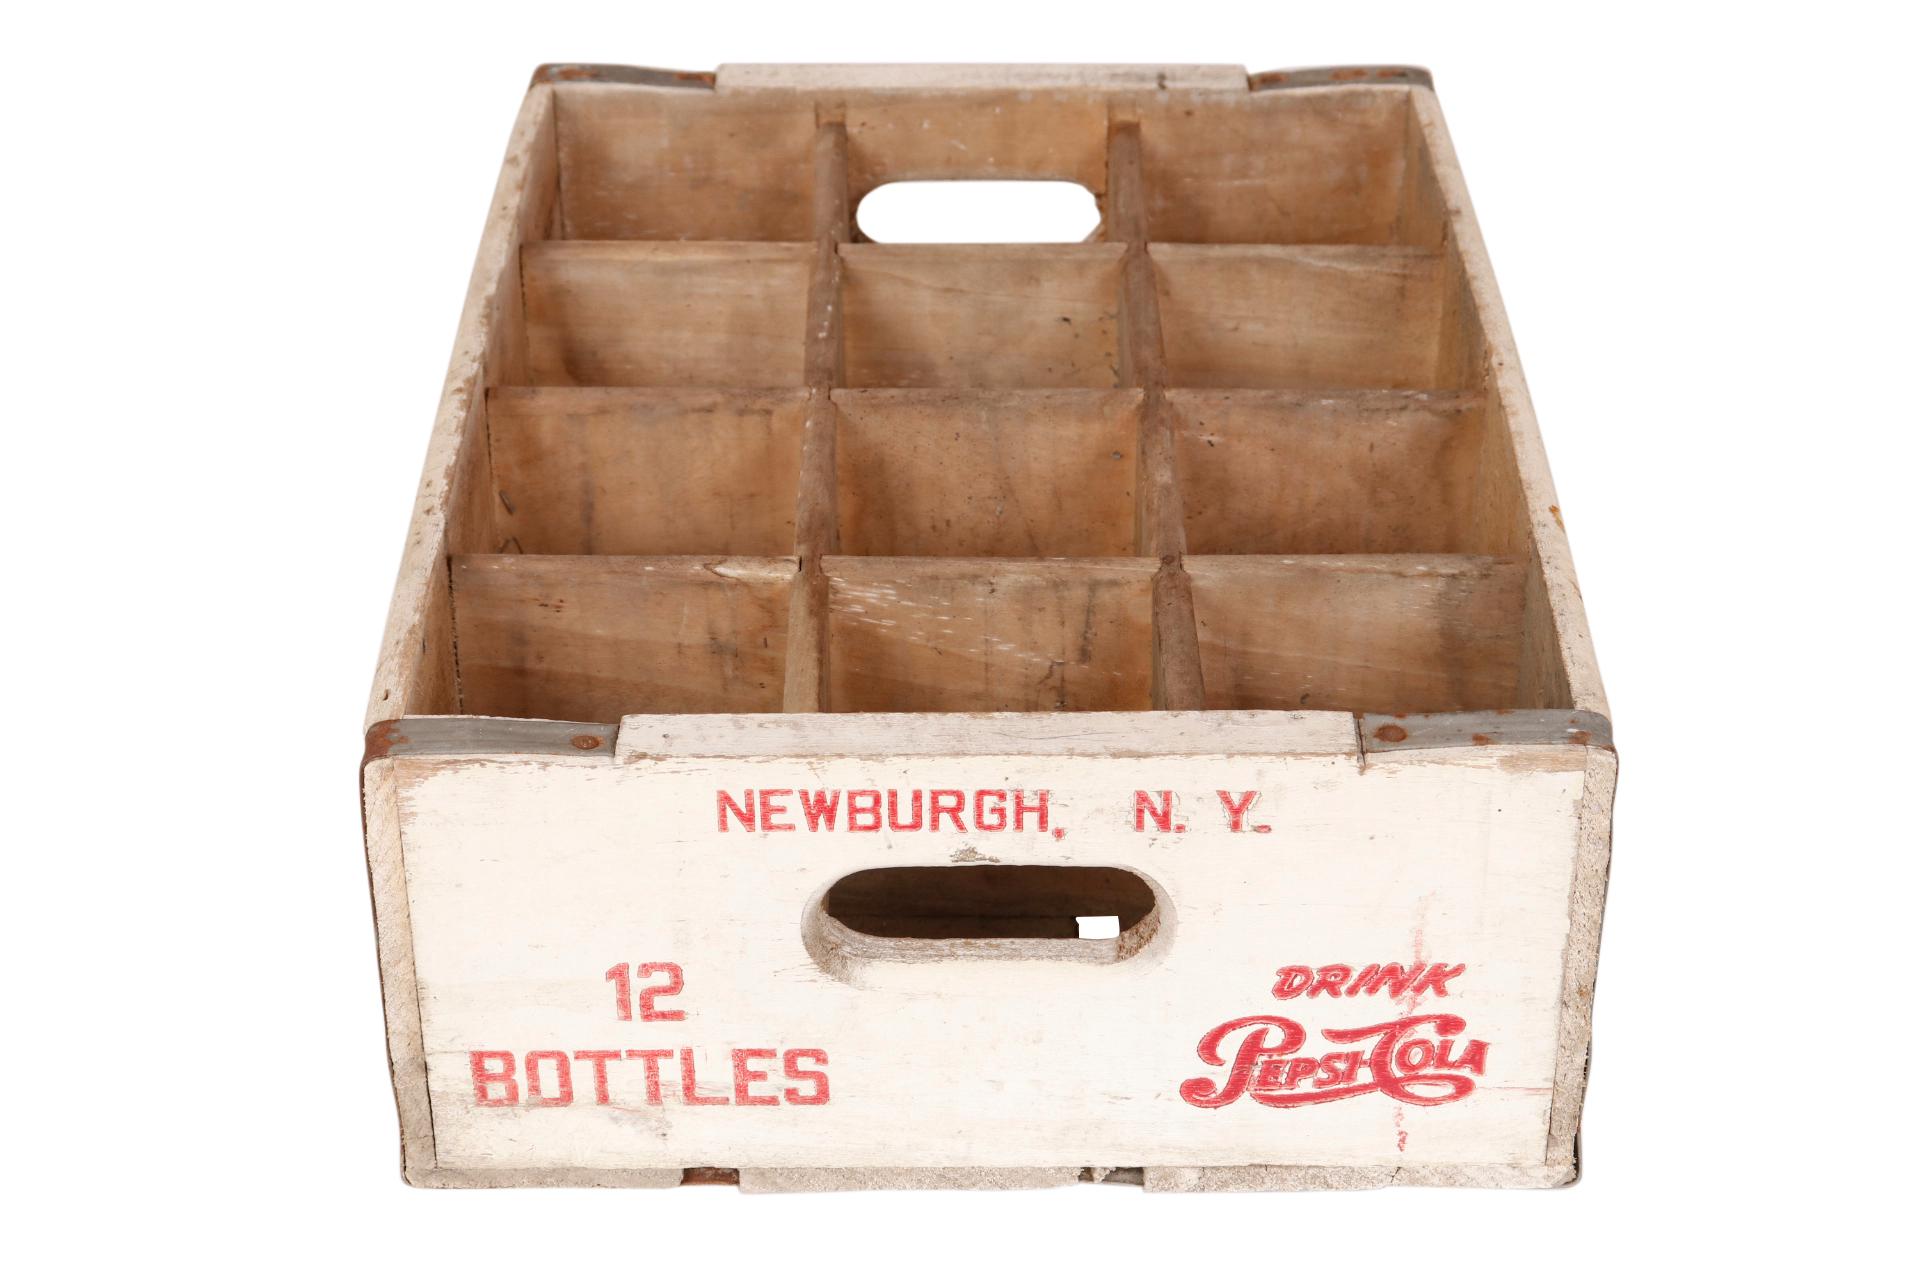 A 1950’s wooden Pepsi crate with a slat base. Reads “Drink Pepsi Cola” on each side in red lettering with “Newburgh NY, 12 Bottles” and oval cut out handles on the short sides. Metal straps support the corners and on the inside is stamped “Durable